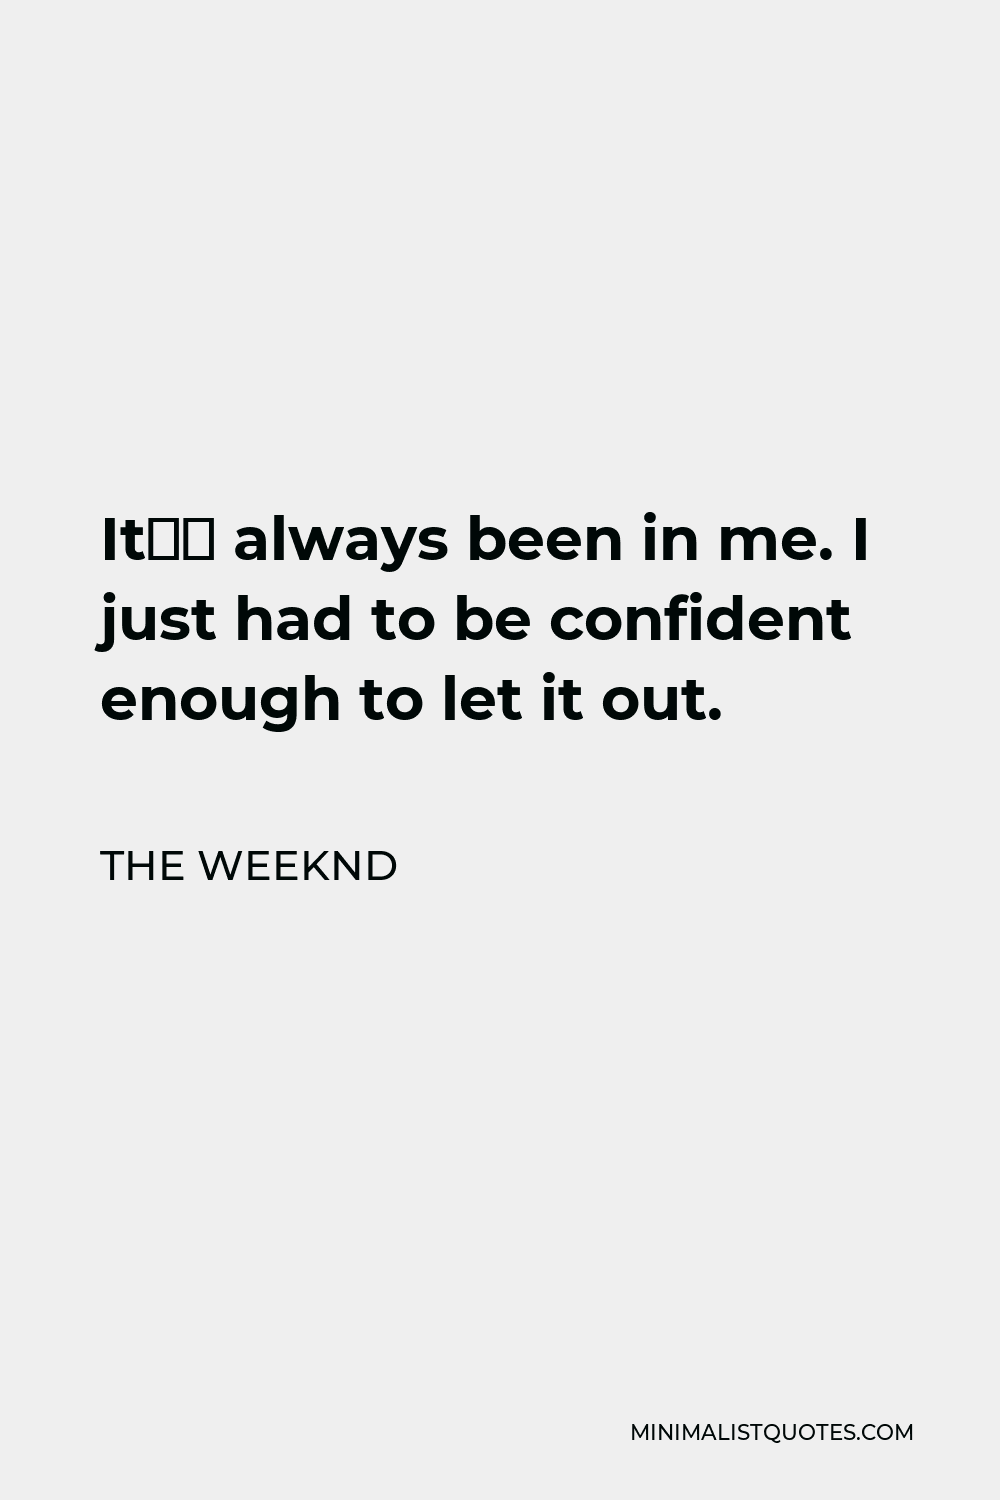 The Weeknd Quote - It’s always been in me. I just had to be confident enough to let it out.